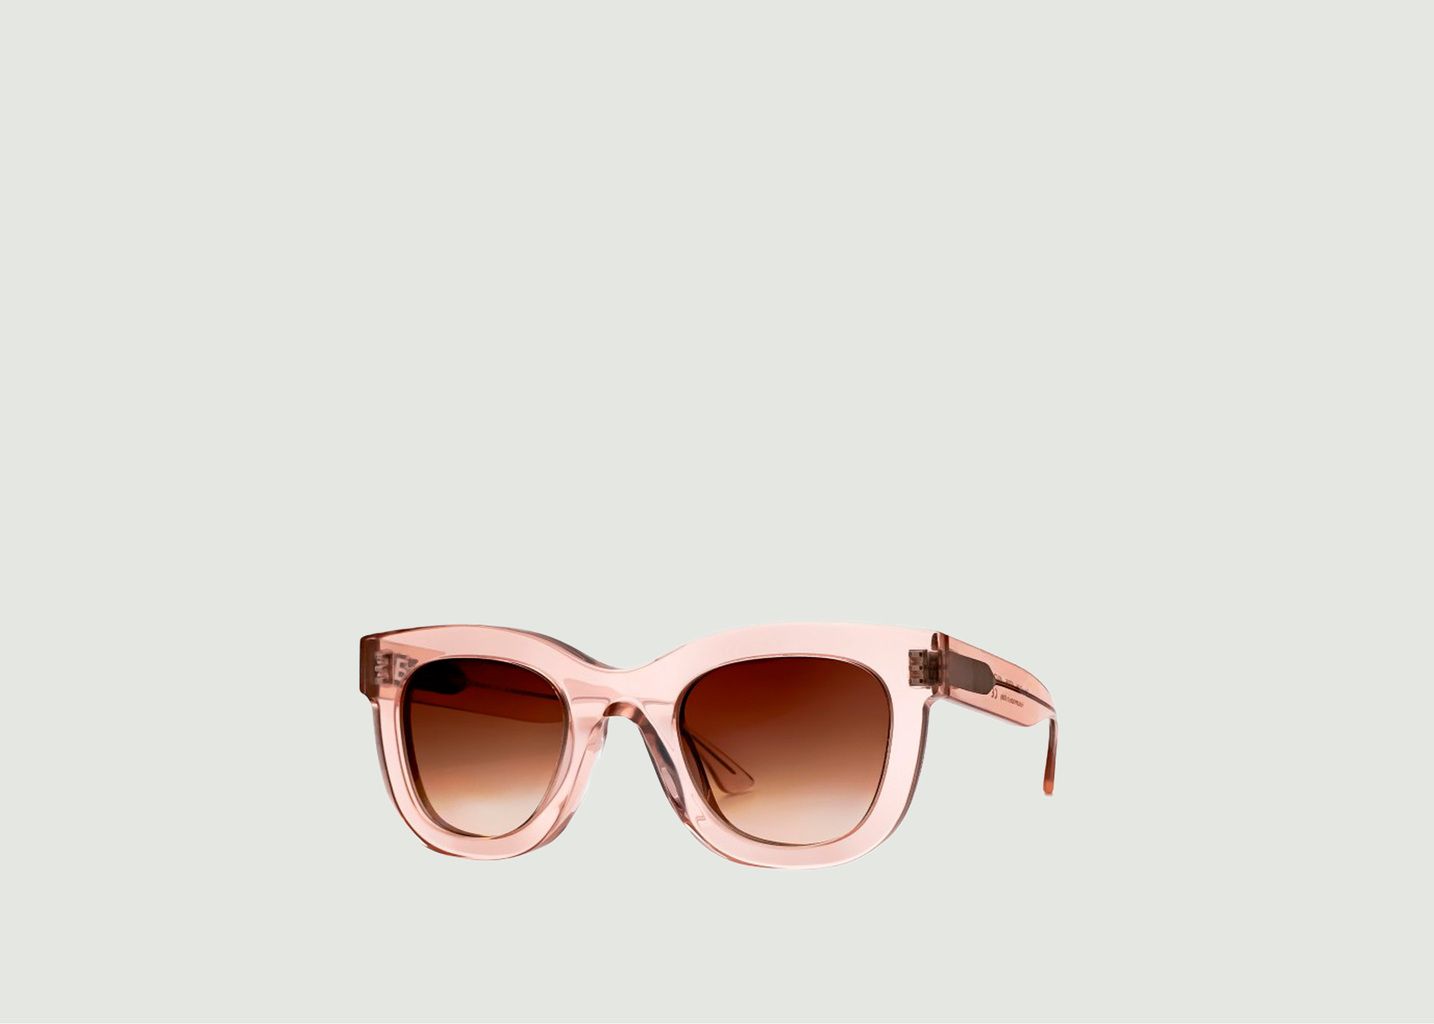 Gambly Sonnenbrille - Thierry Lasry